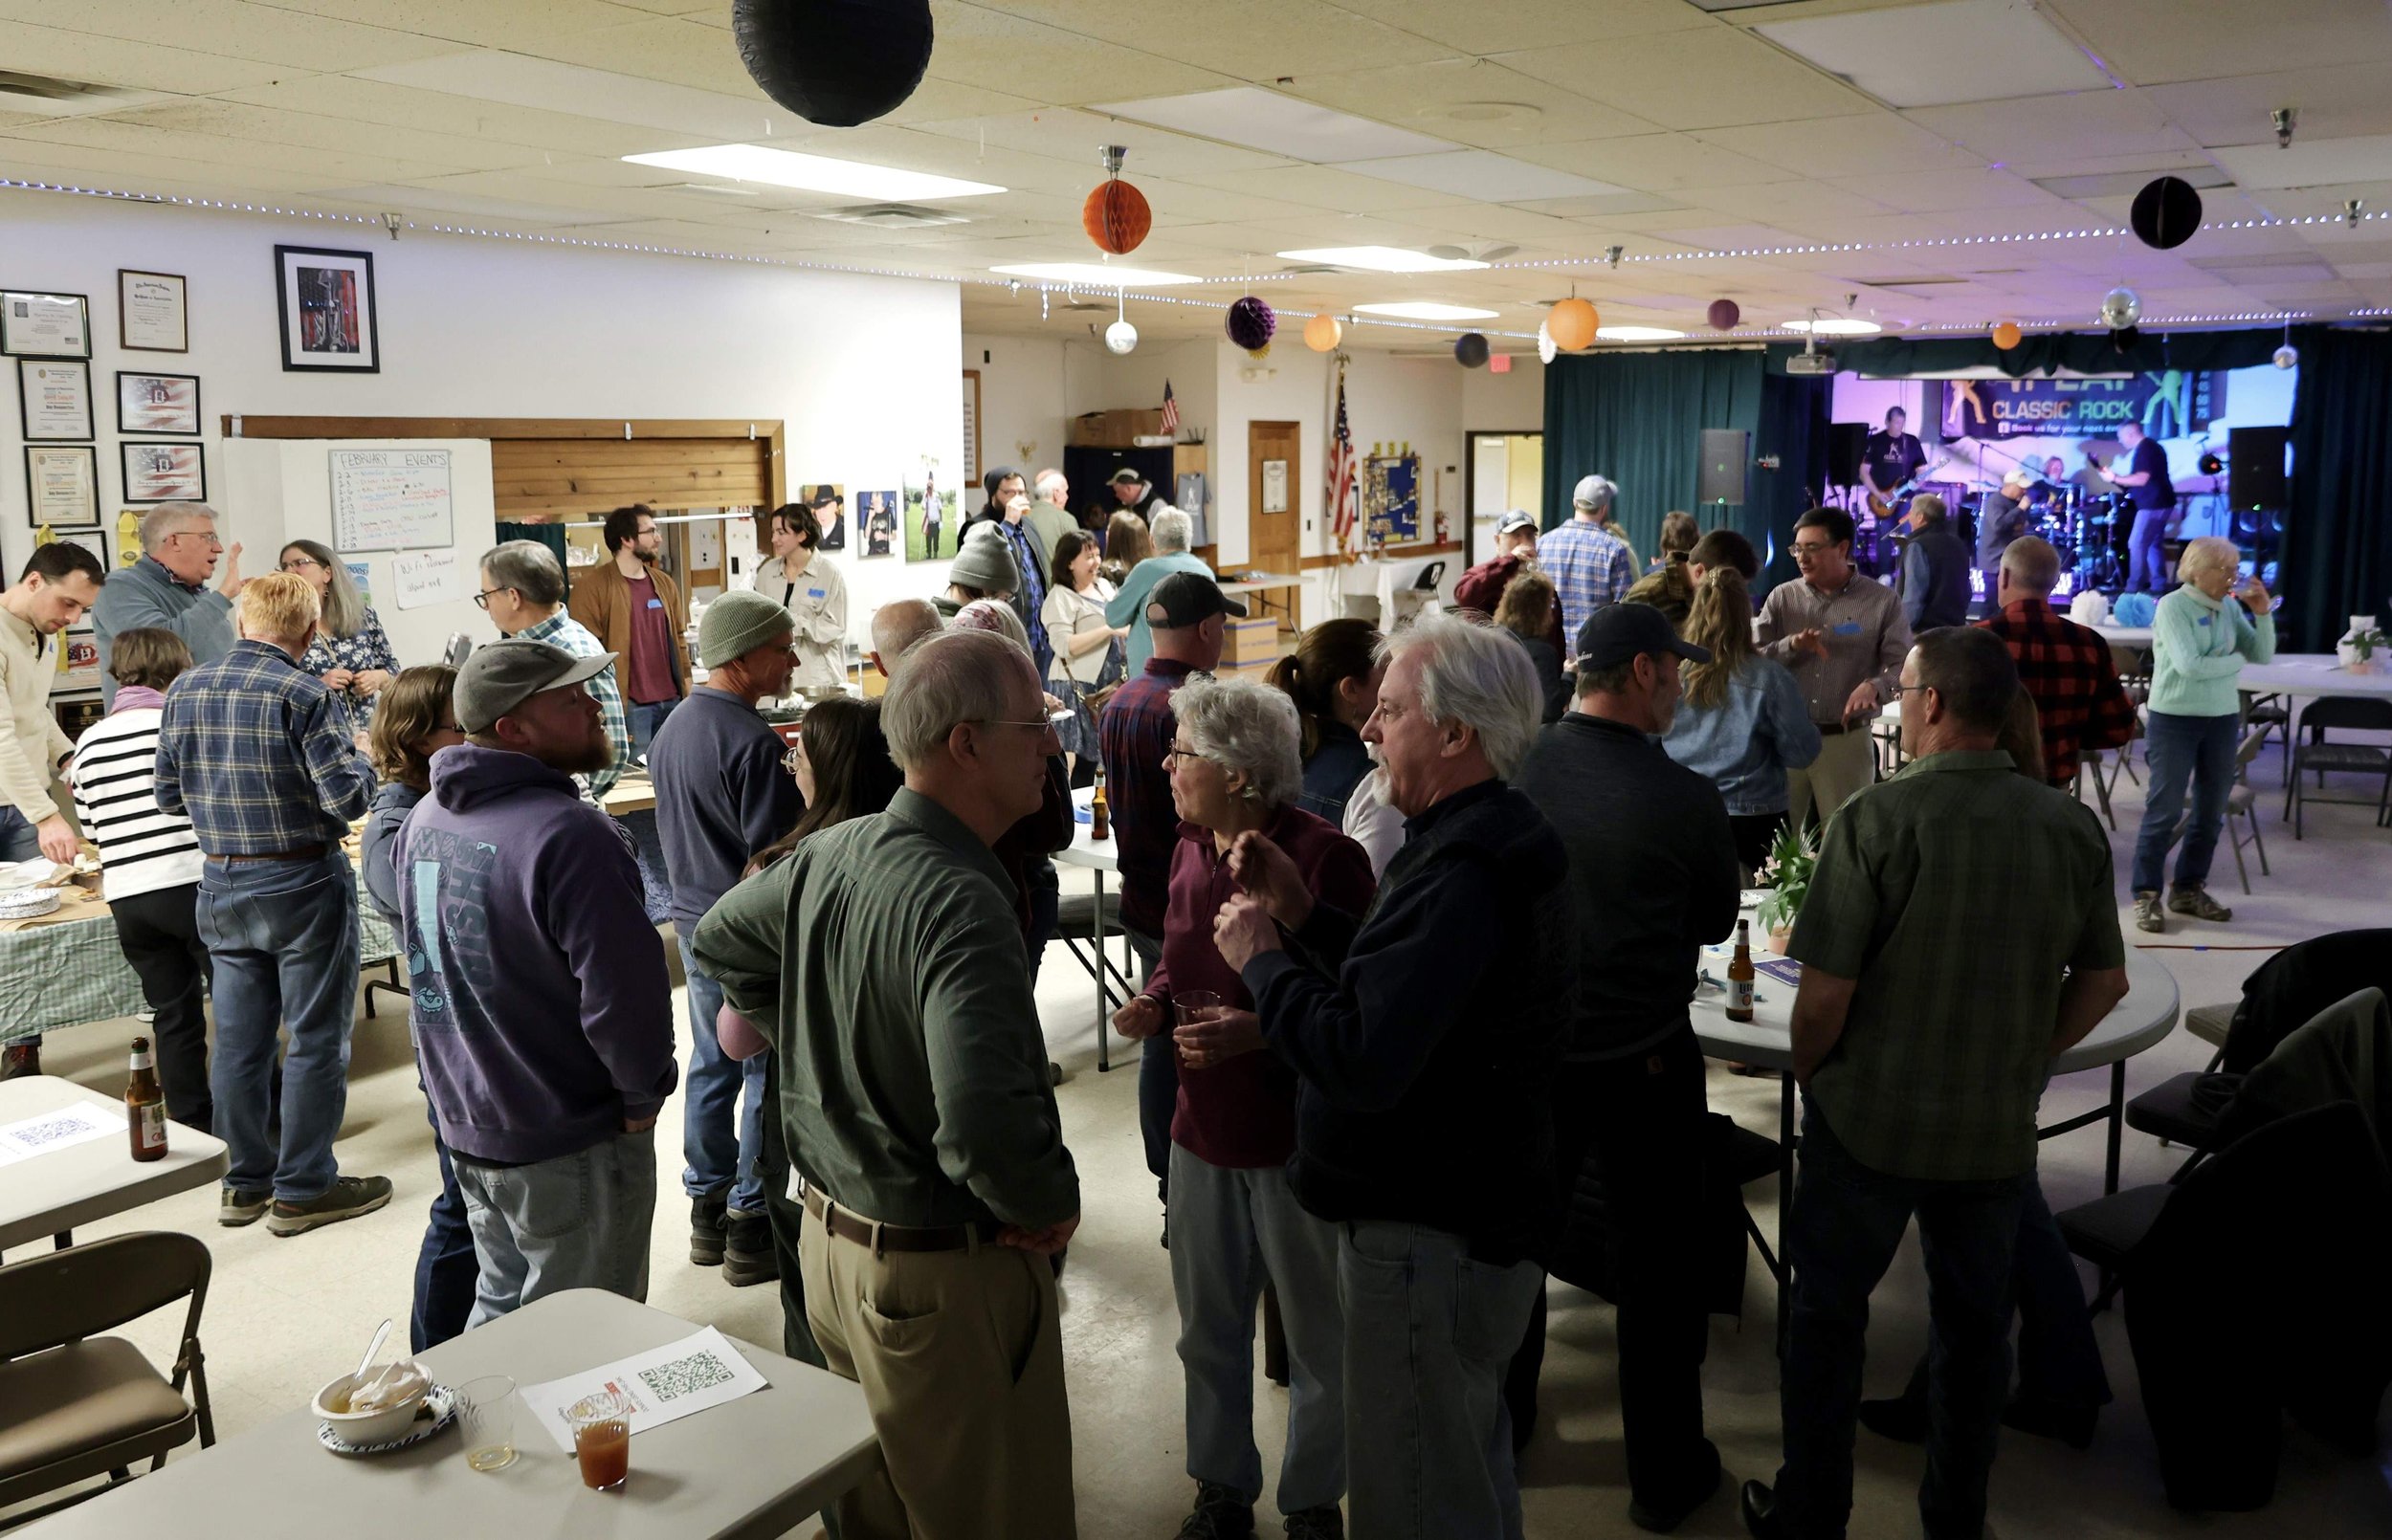  People mingling at the What The Floods(!) event hosted at the American Legion in Waterbury. Photo by Catherine Morrissey 